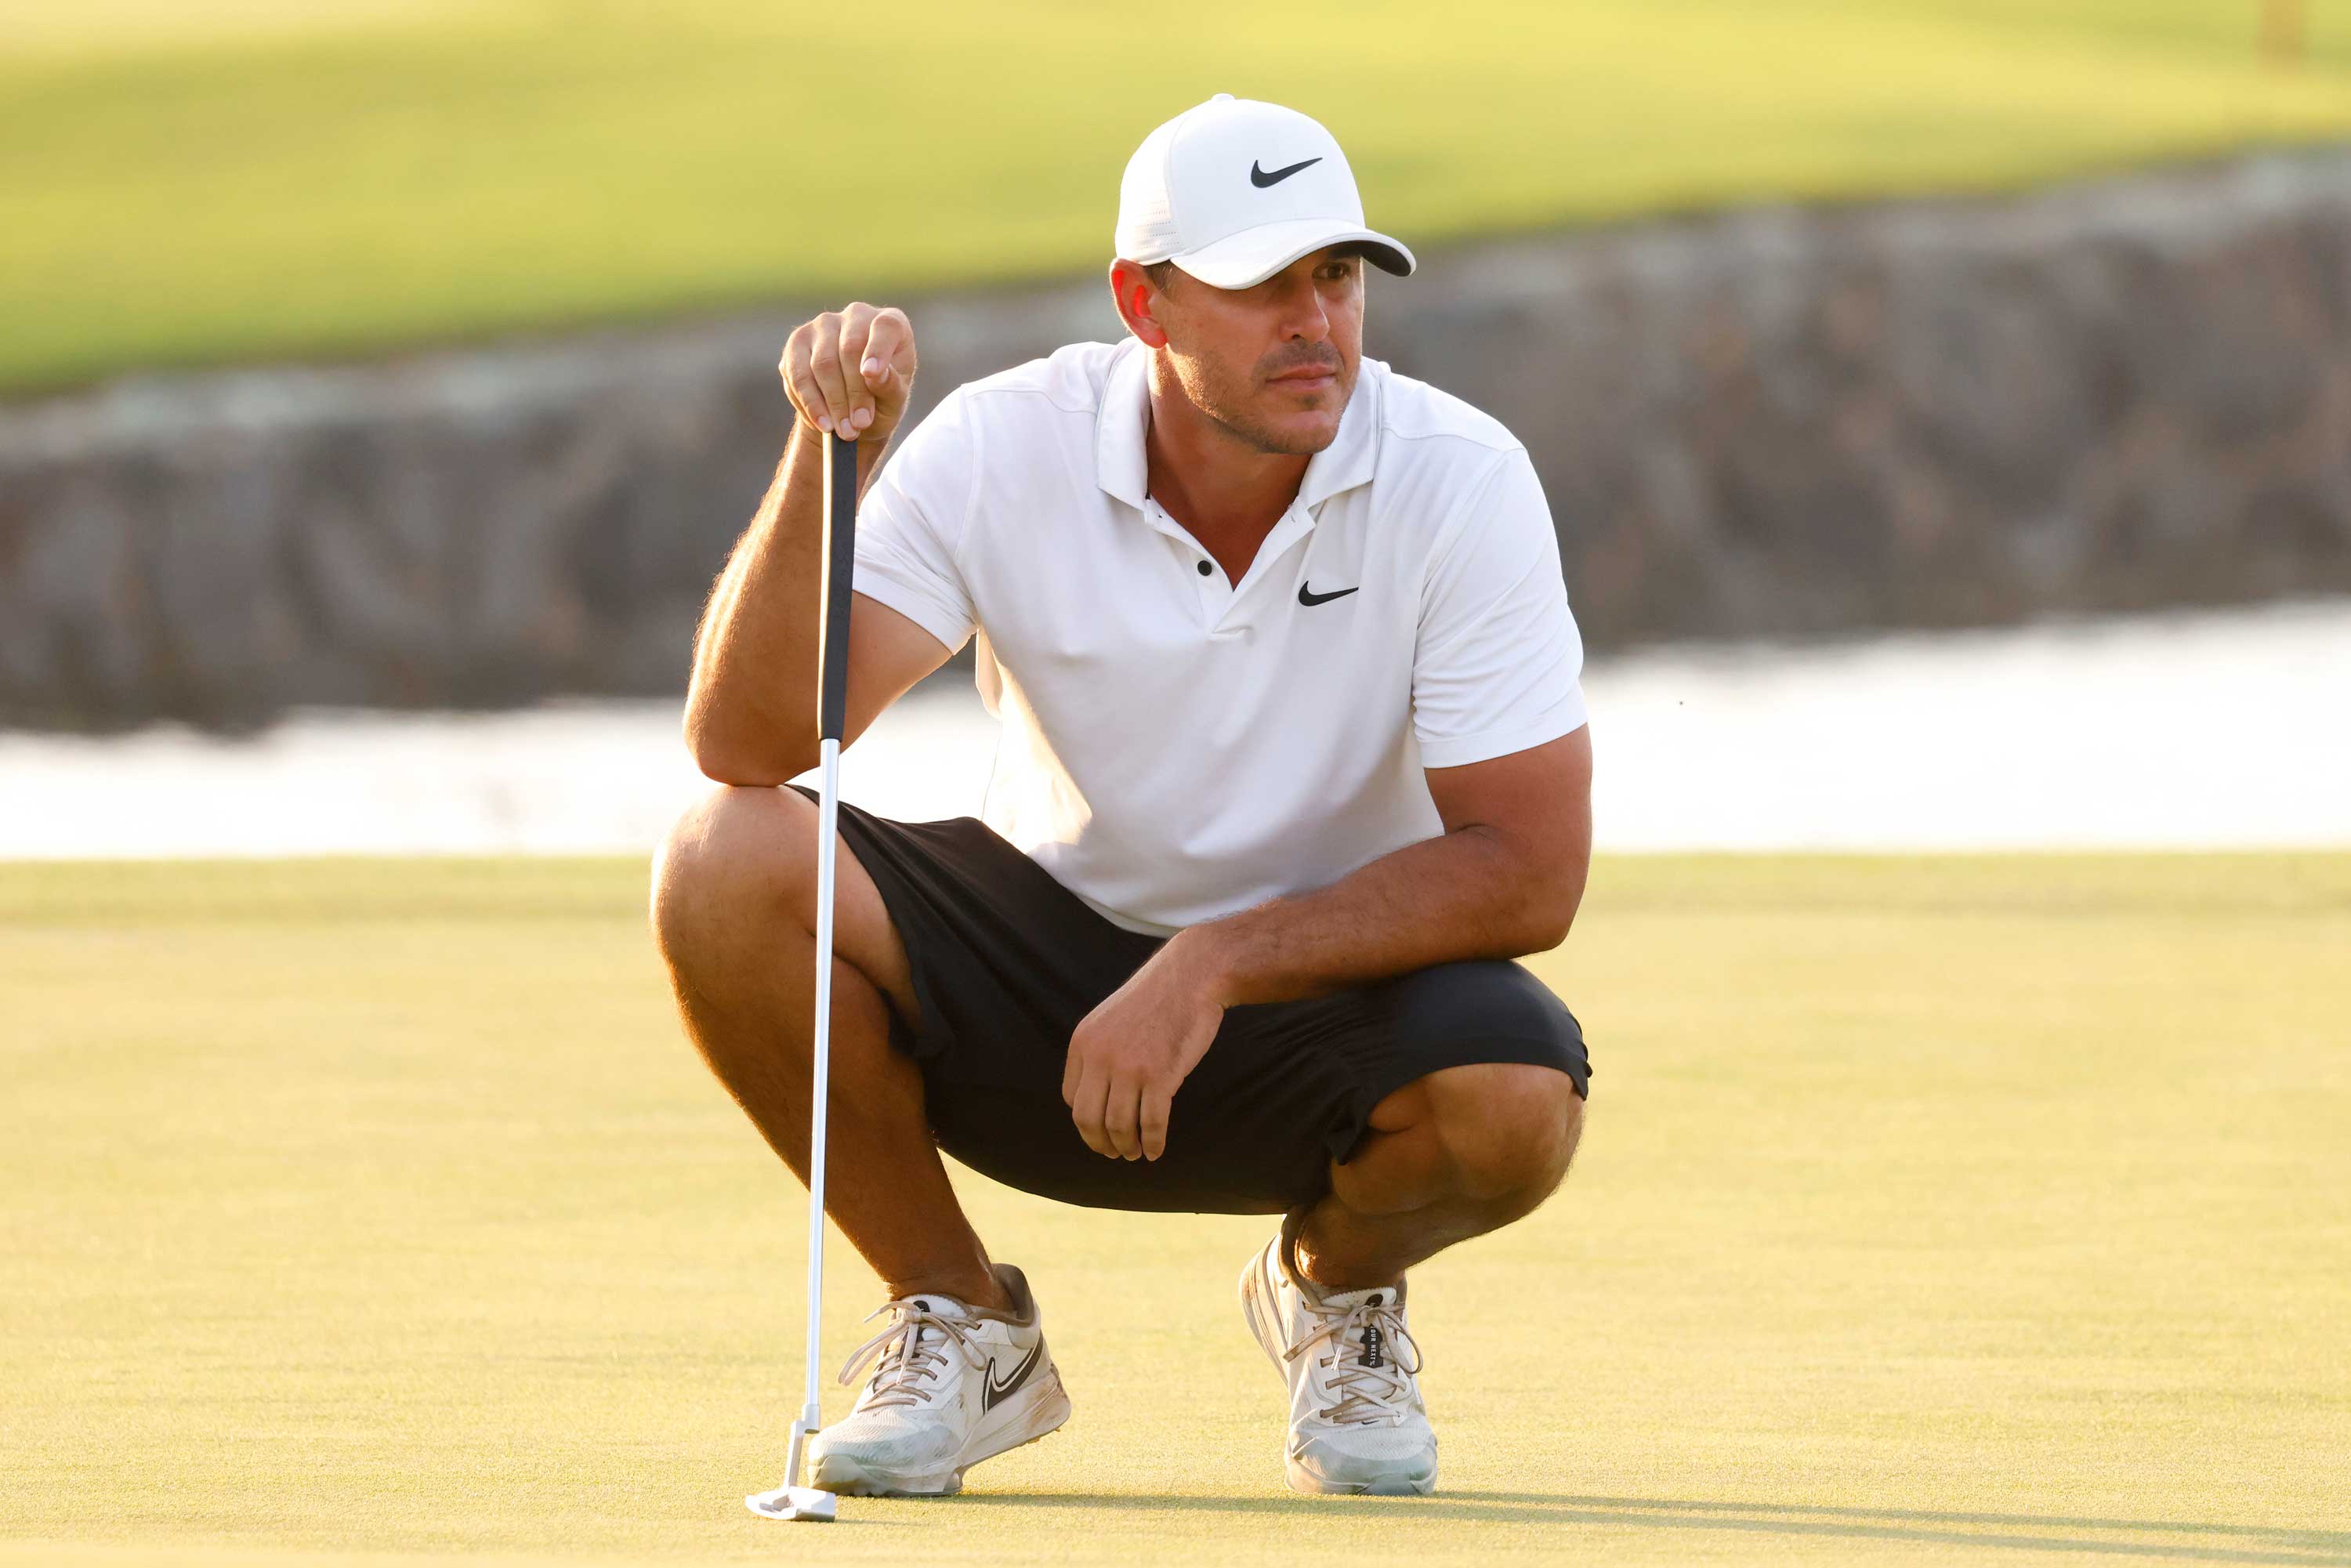 Discouraged by injuries that were derailing his career, Brooks Koepka hopes hes back on track after LIV Golf win Golf News and Tour Information GolfDigest